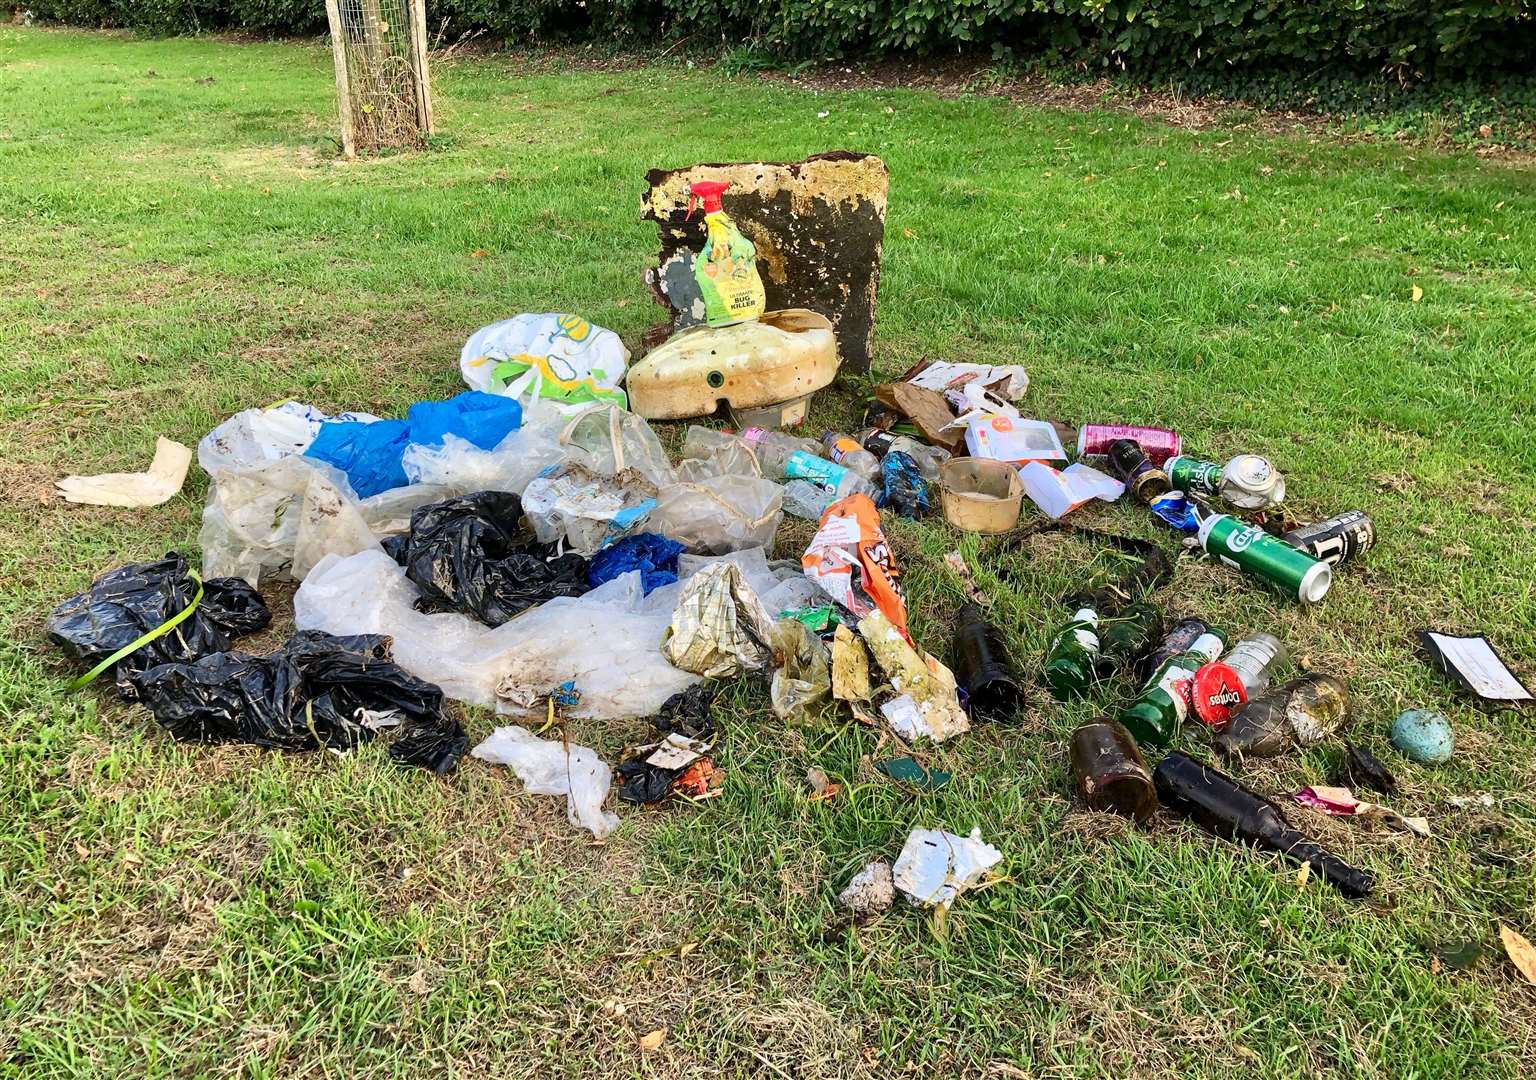 Rubbish pulled from the River Stour near Kingsmead Field last week